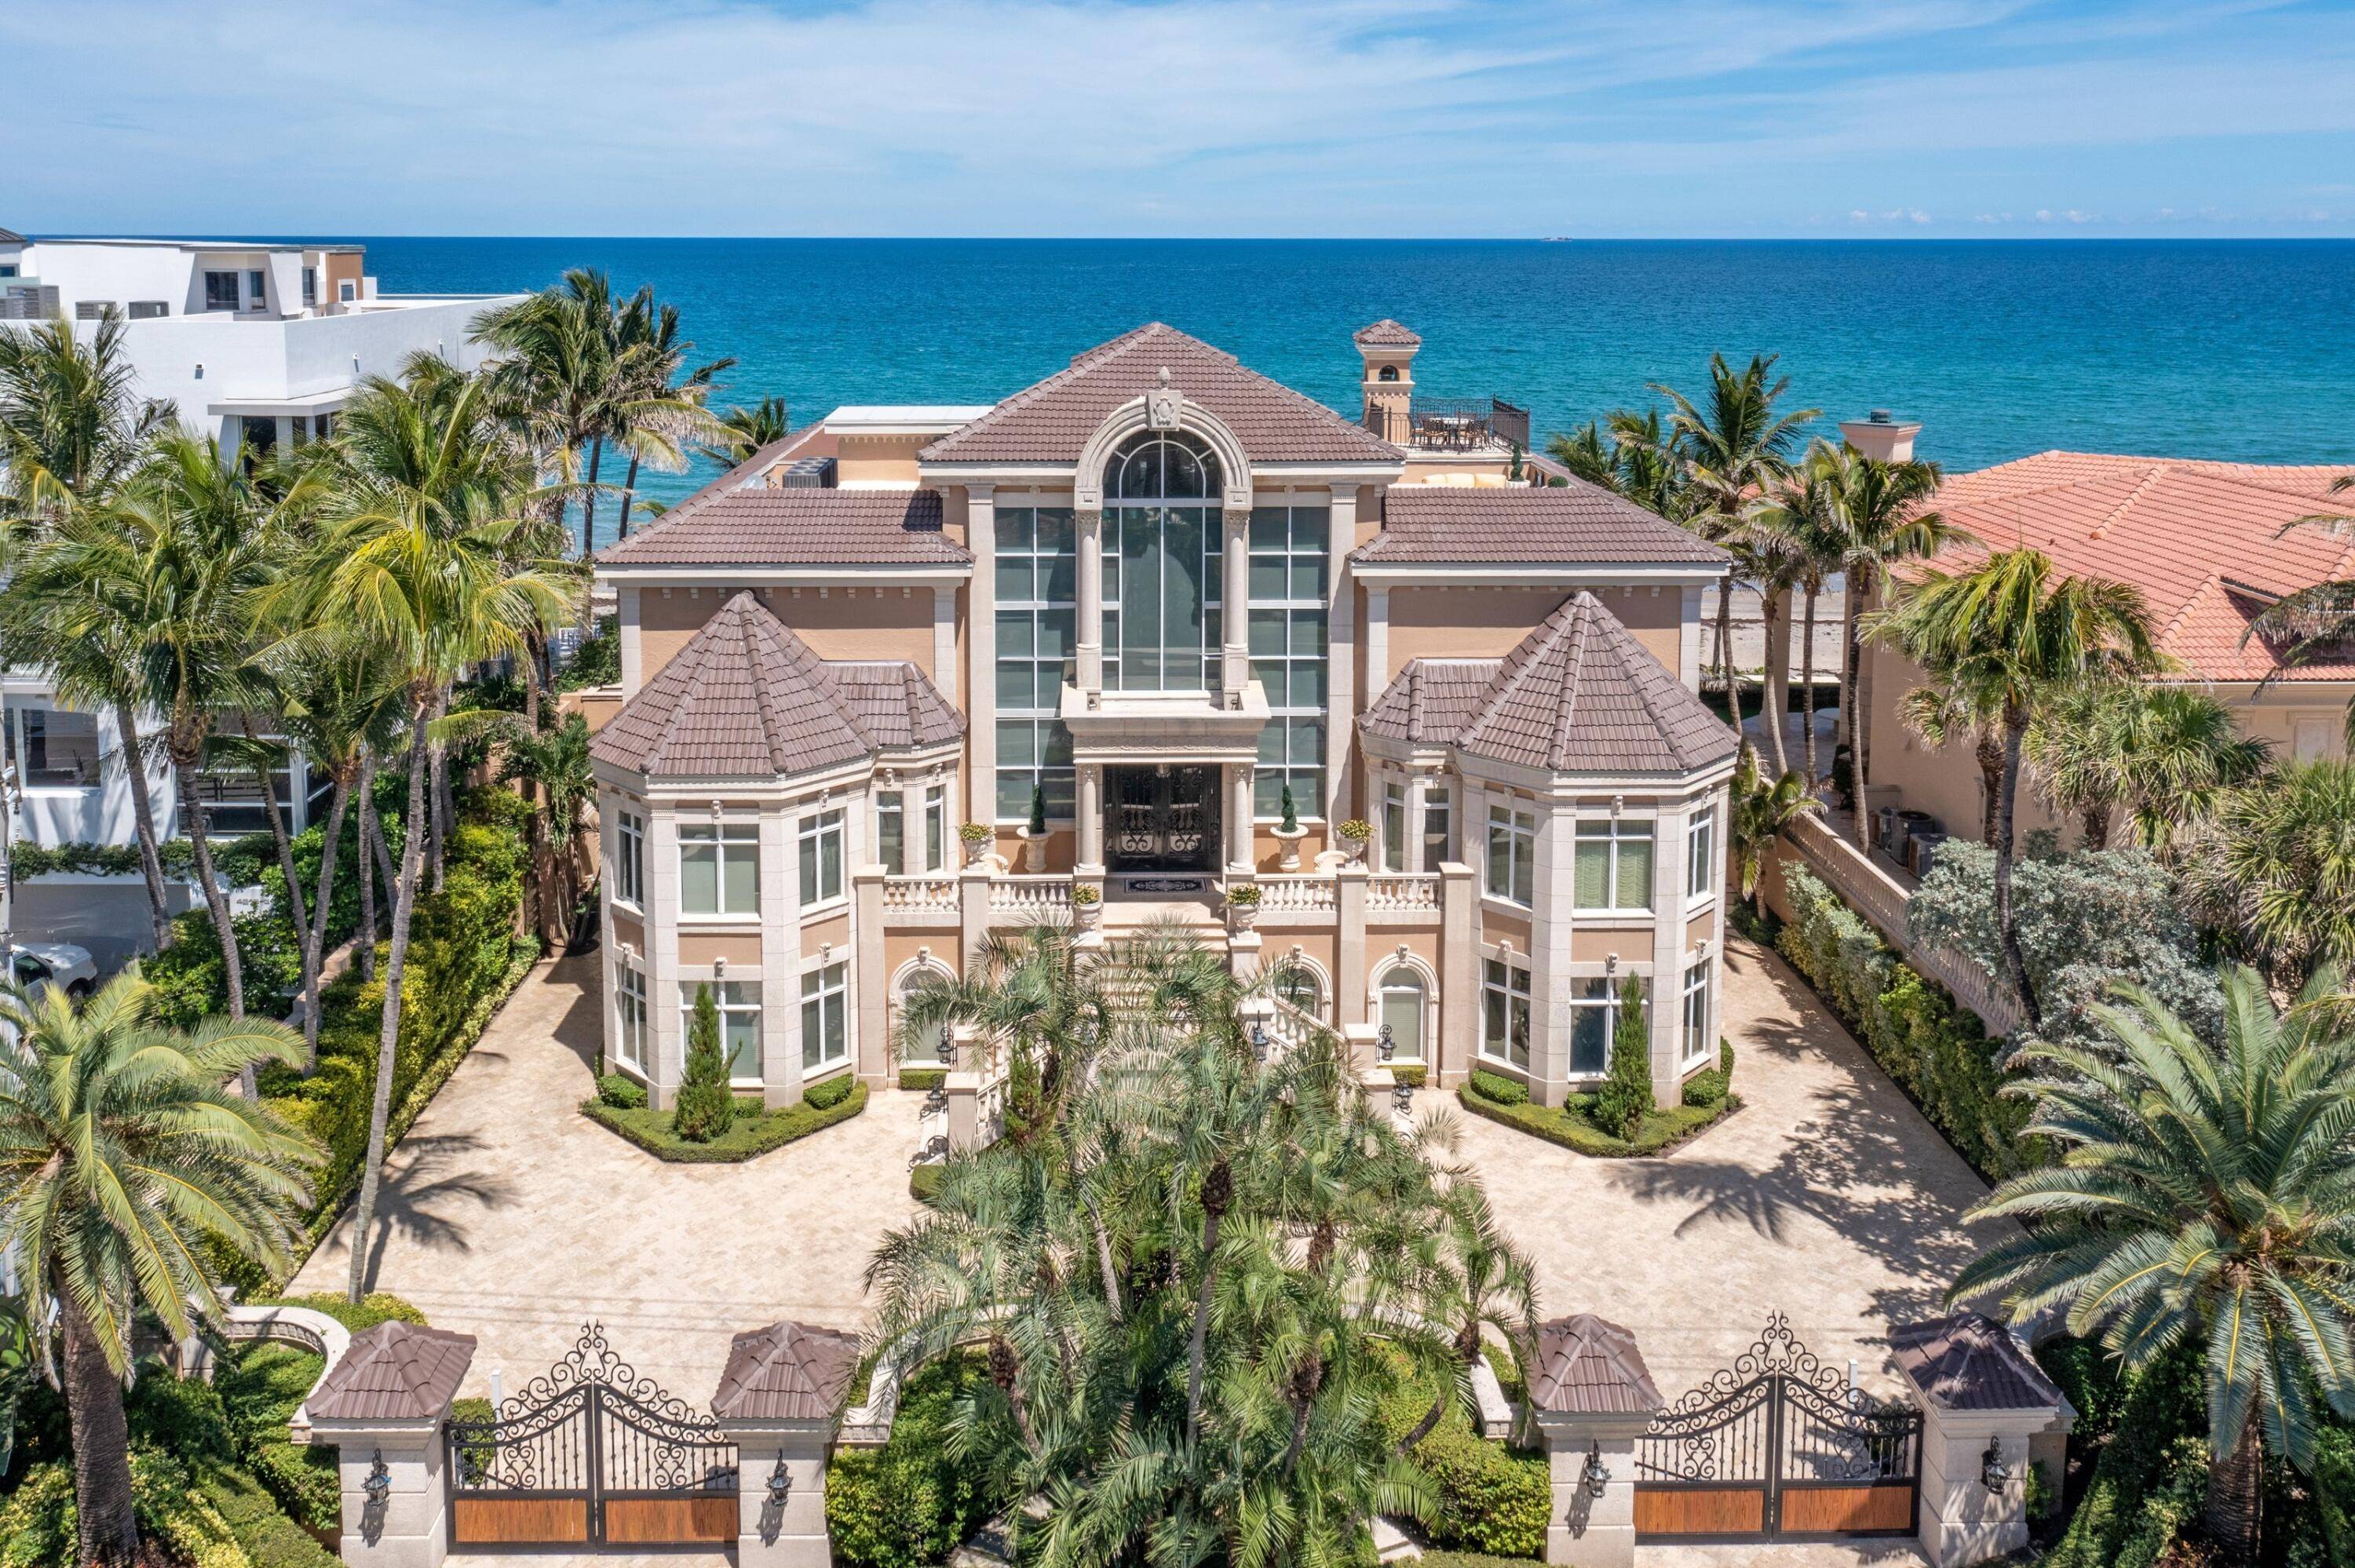 Offered at 25 million fully furnished Including priceless antiques art, this is finest example of exquisite Italian Renaissance style architecture and design on S E Florida's platinum coast.